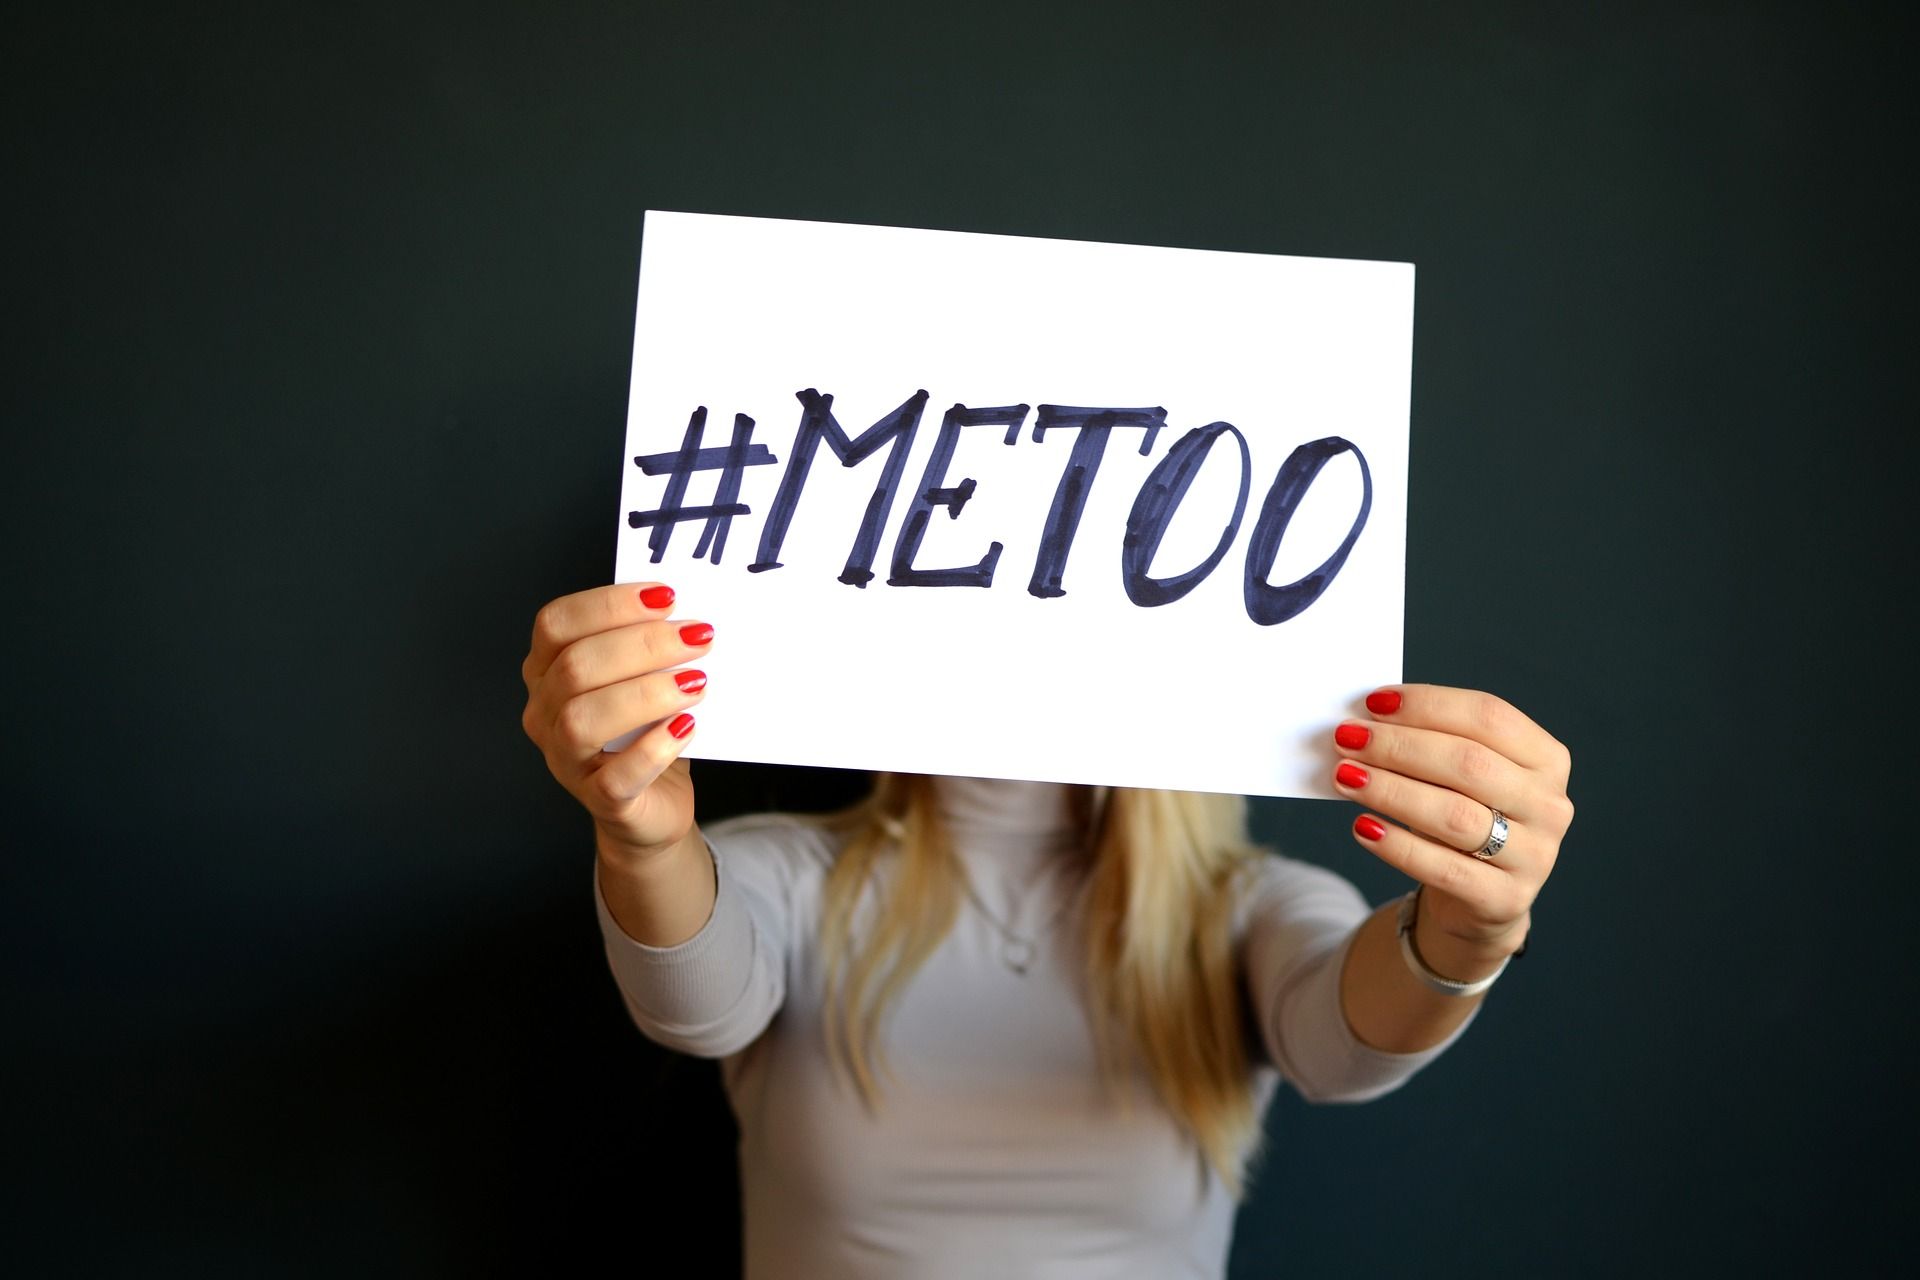 Part II: Employees Don’t See Companies Doing Much About #MeToo